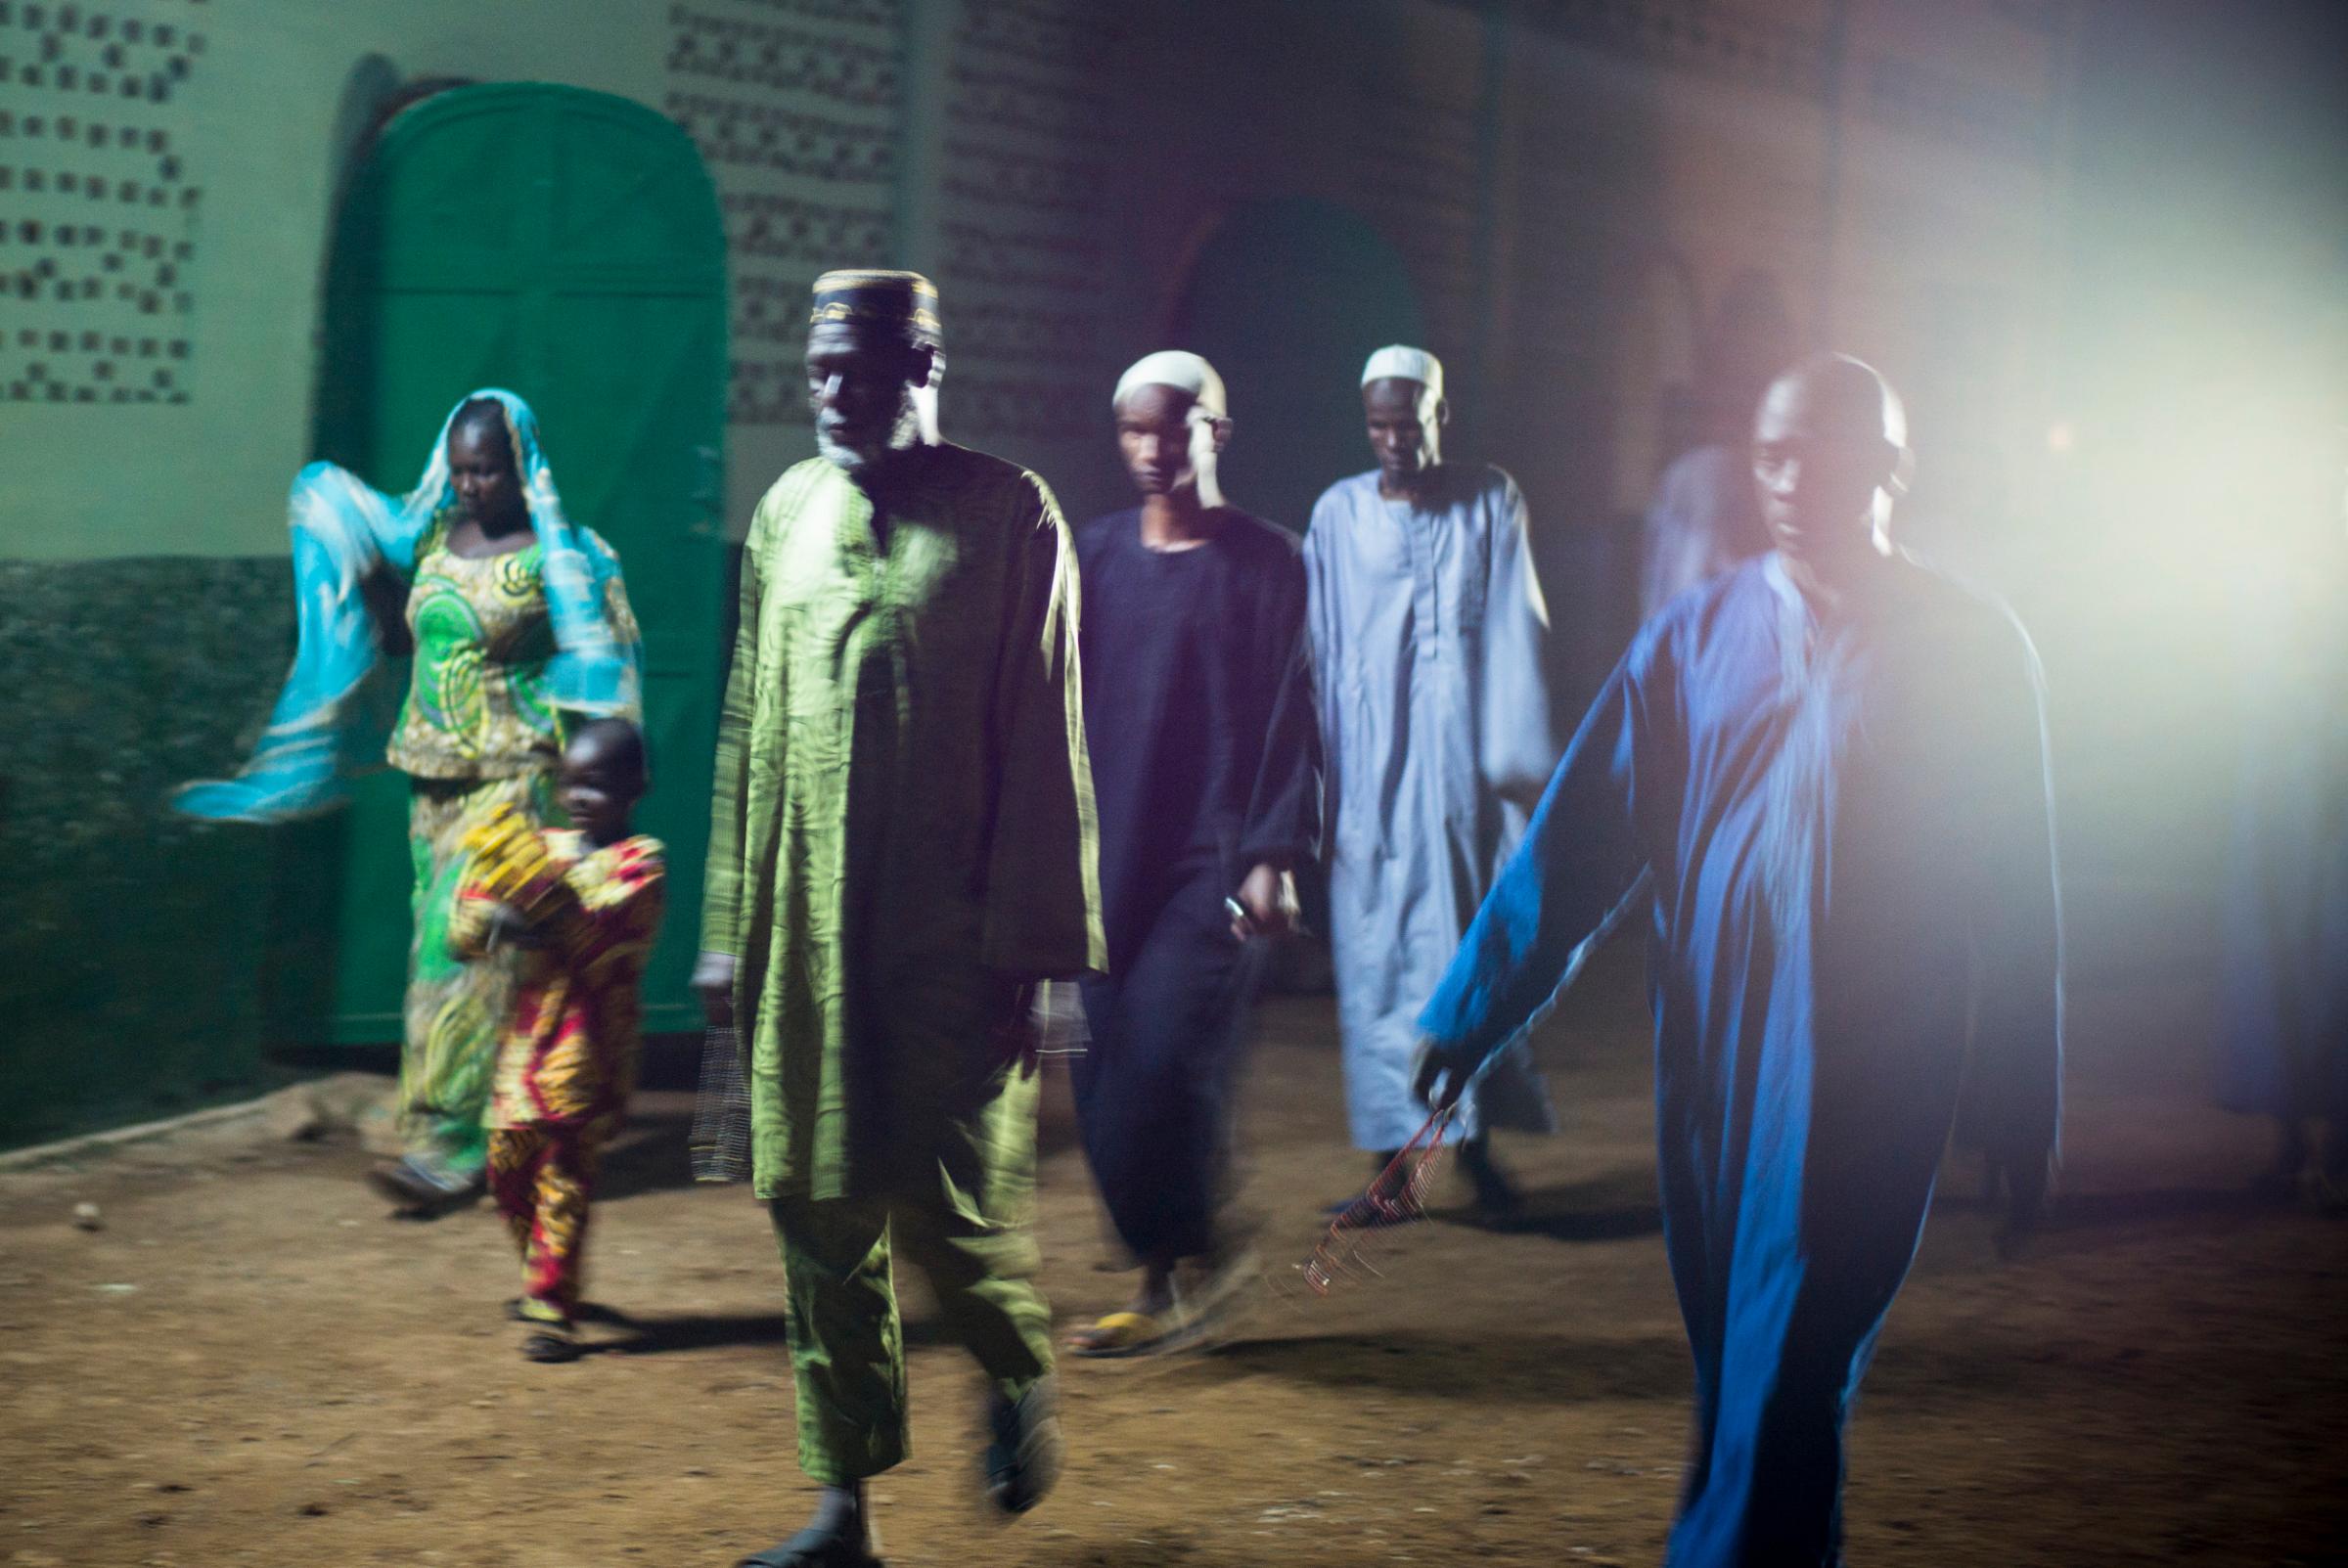 Muslims leave the central mosque after the first prayer of the day in Bangui, Central African Republic, Nov. 30, 2015.